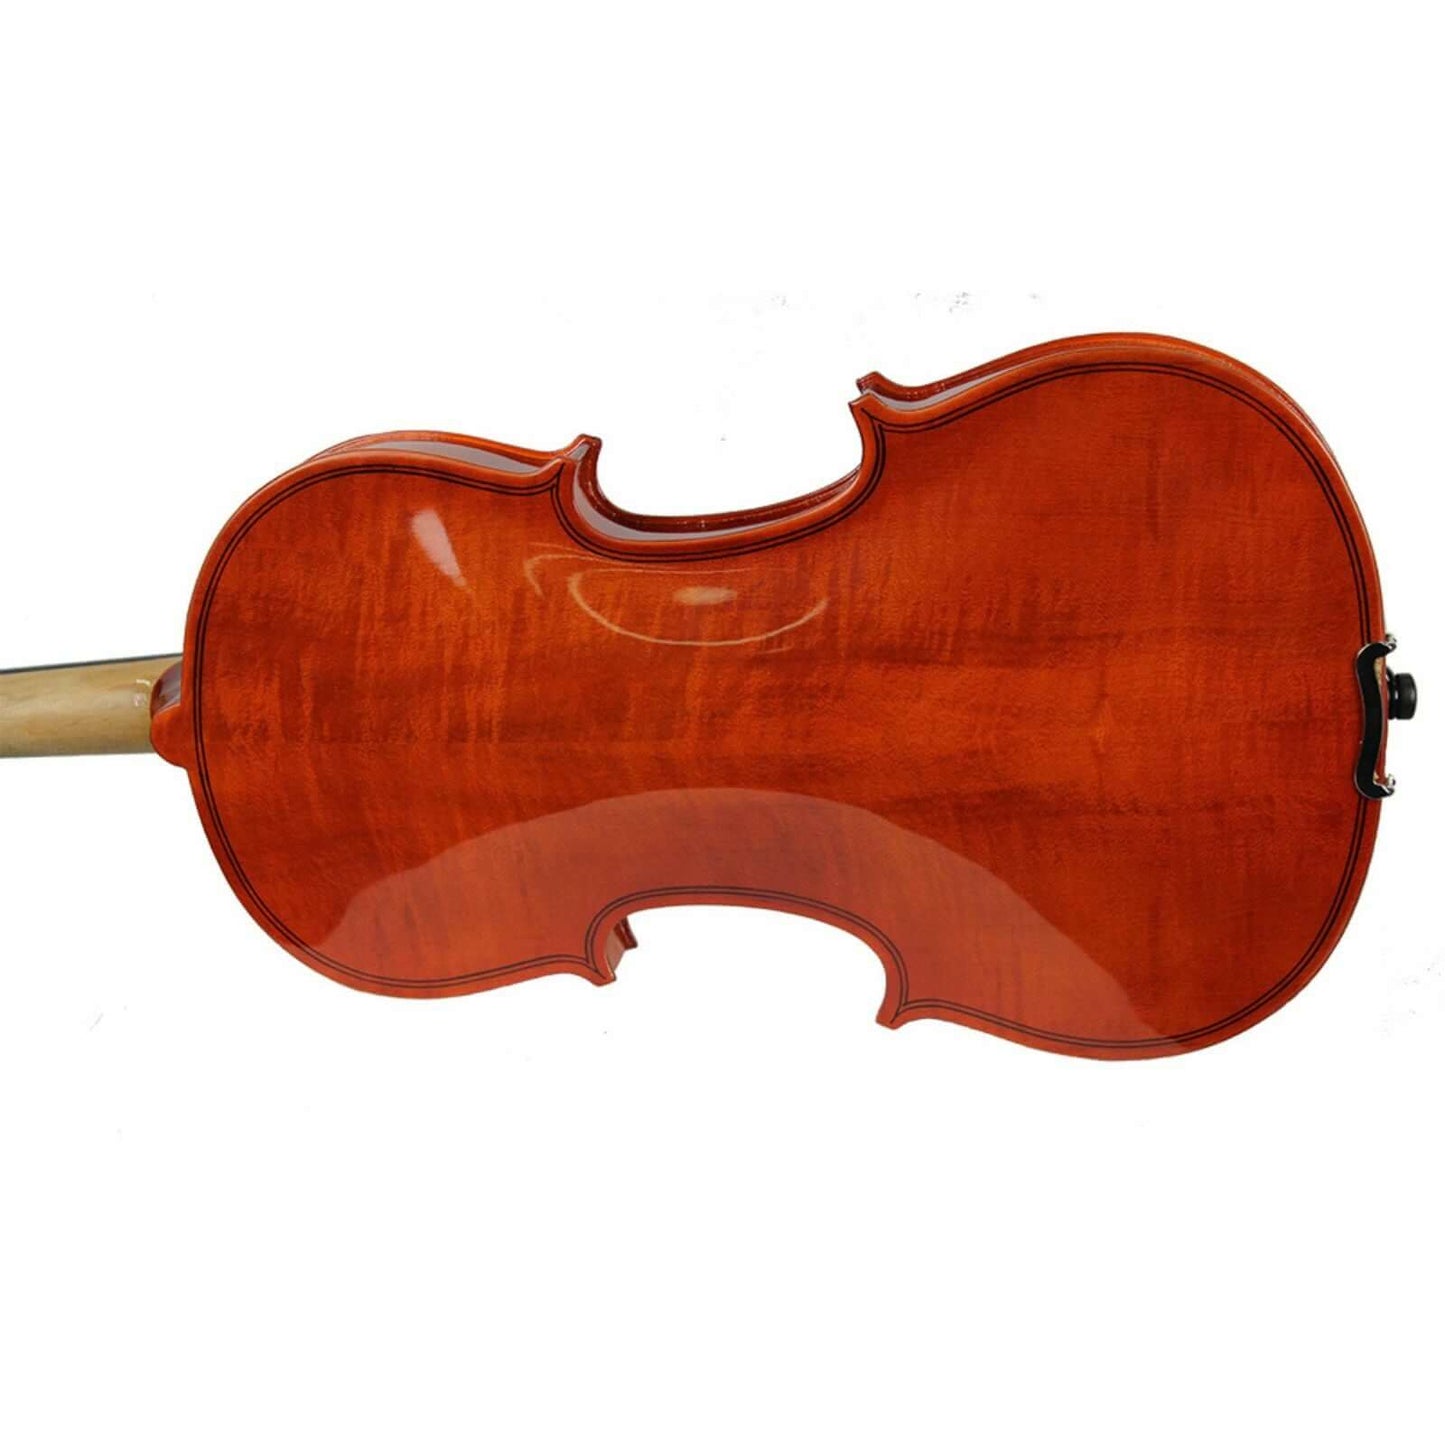 Axiom Beginner Violin Outfit - Student 1/8 (Eighth Size) School Violin